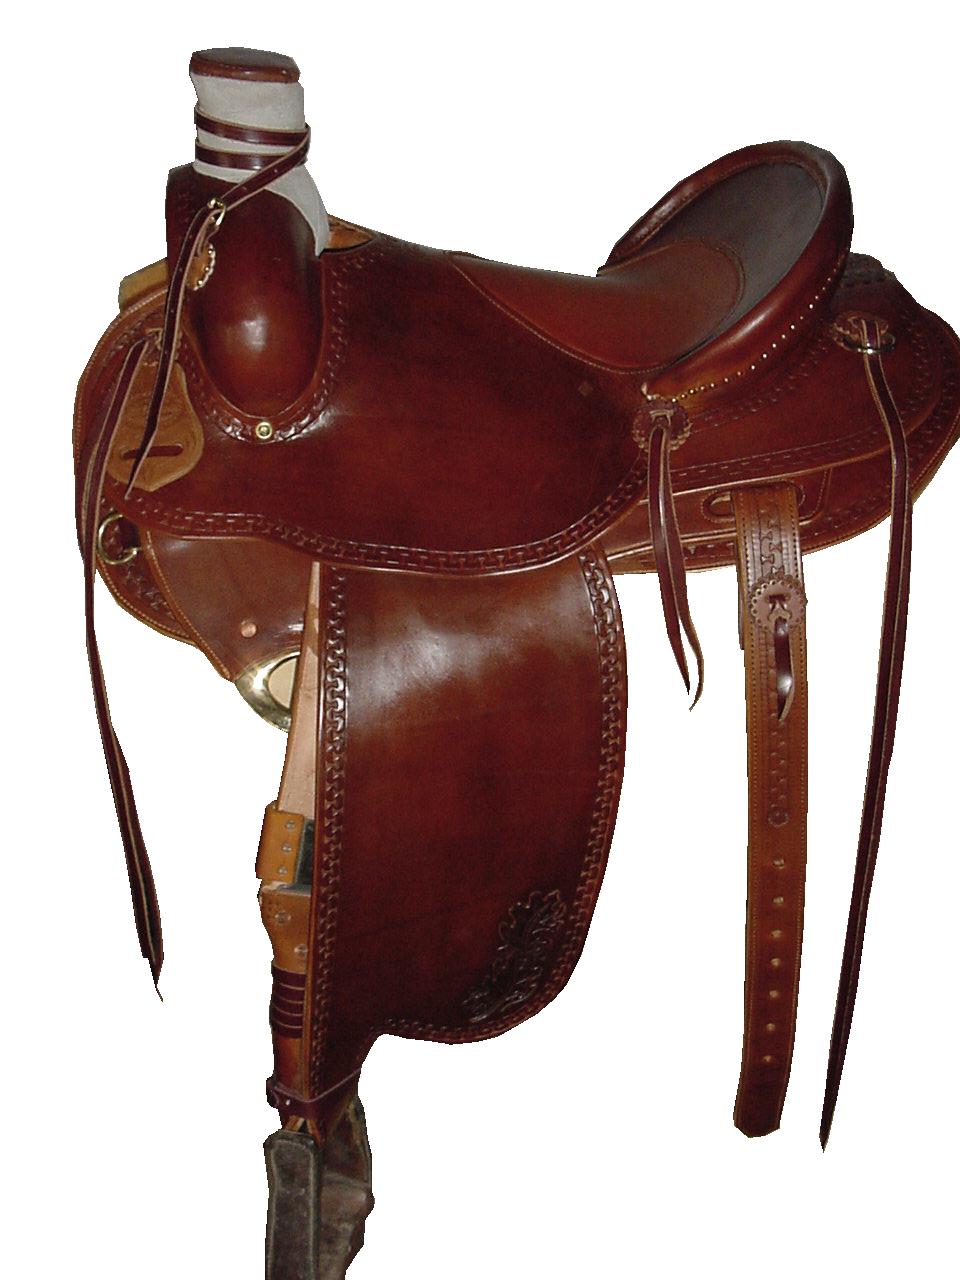 Roping saddle, 13"swells, inset padded seat